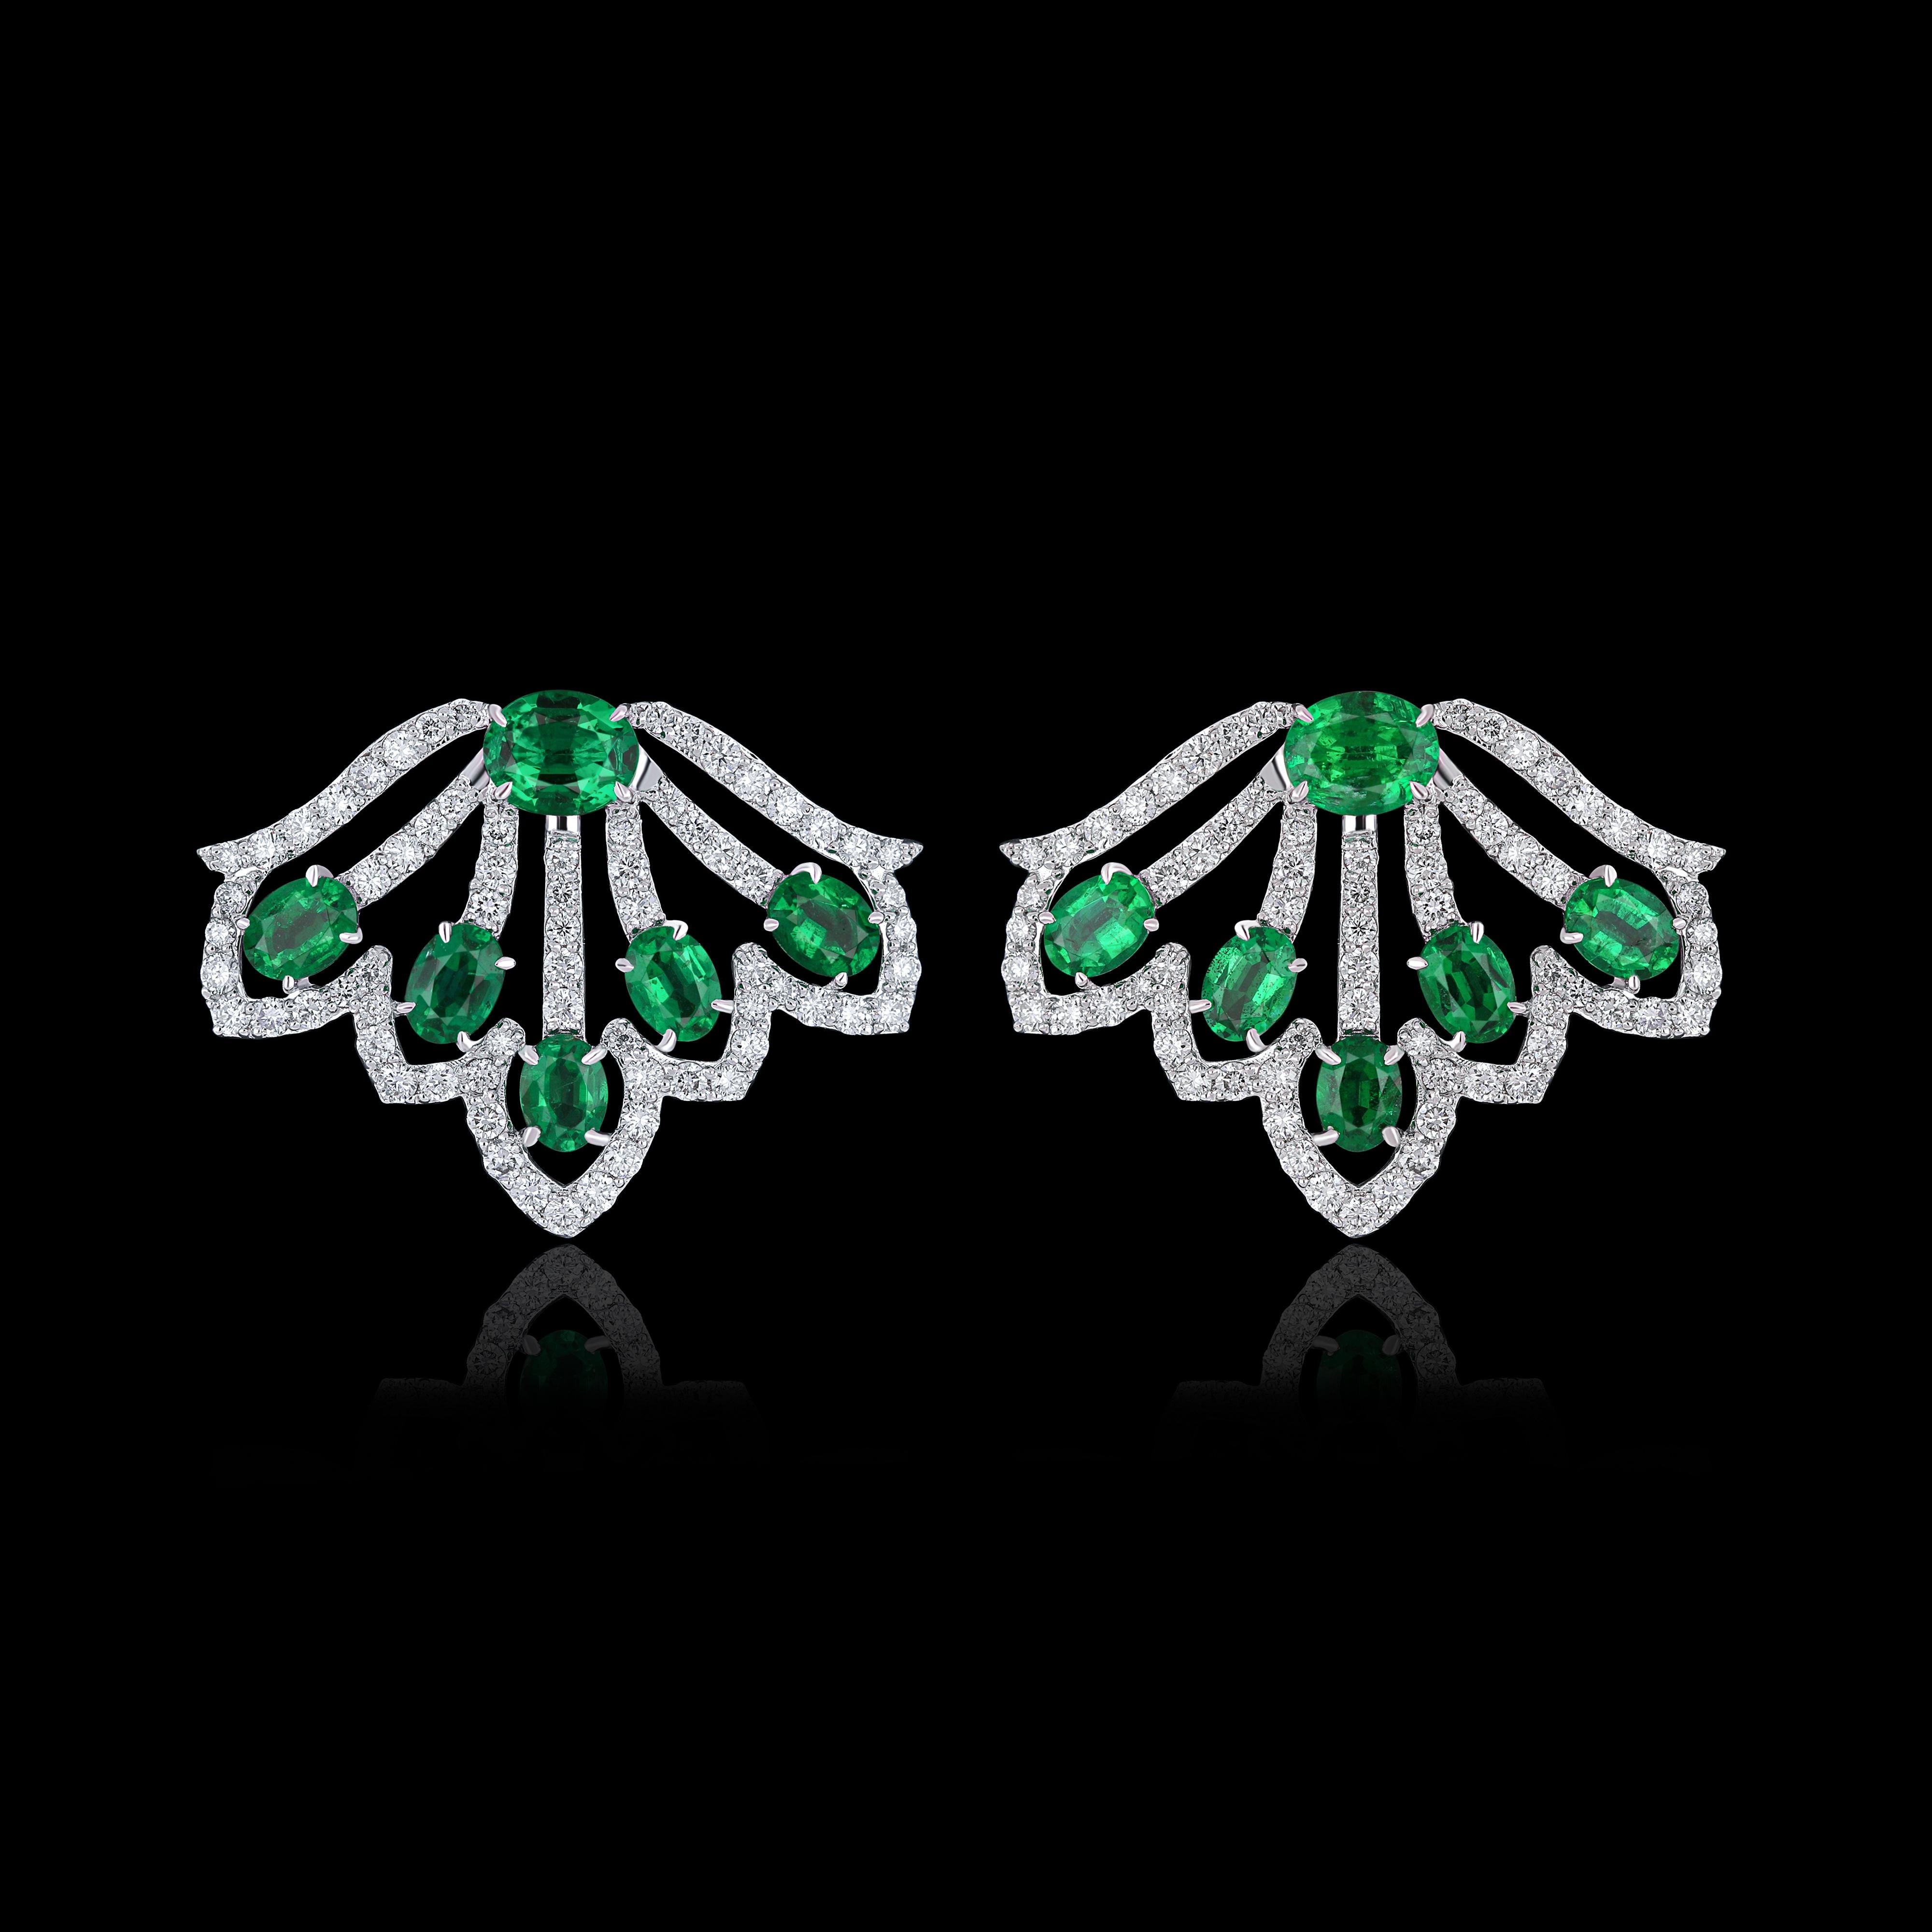 Elegant and exquisitely detailed 18 Karat White Gold Earring, center set with 1.94Cts .Oval Cut Vibrant Green Emerald and micro pave set Diamonds, weighing approx. 1.07Cts Beautifully Hand crafted in 18 Karat White Gold.

Stone Detail:
Emerald: